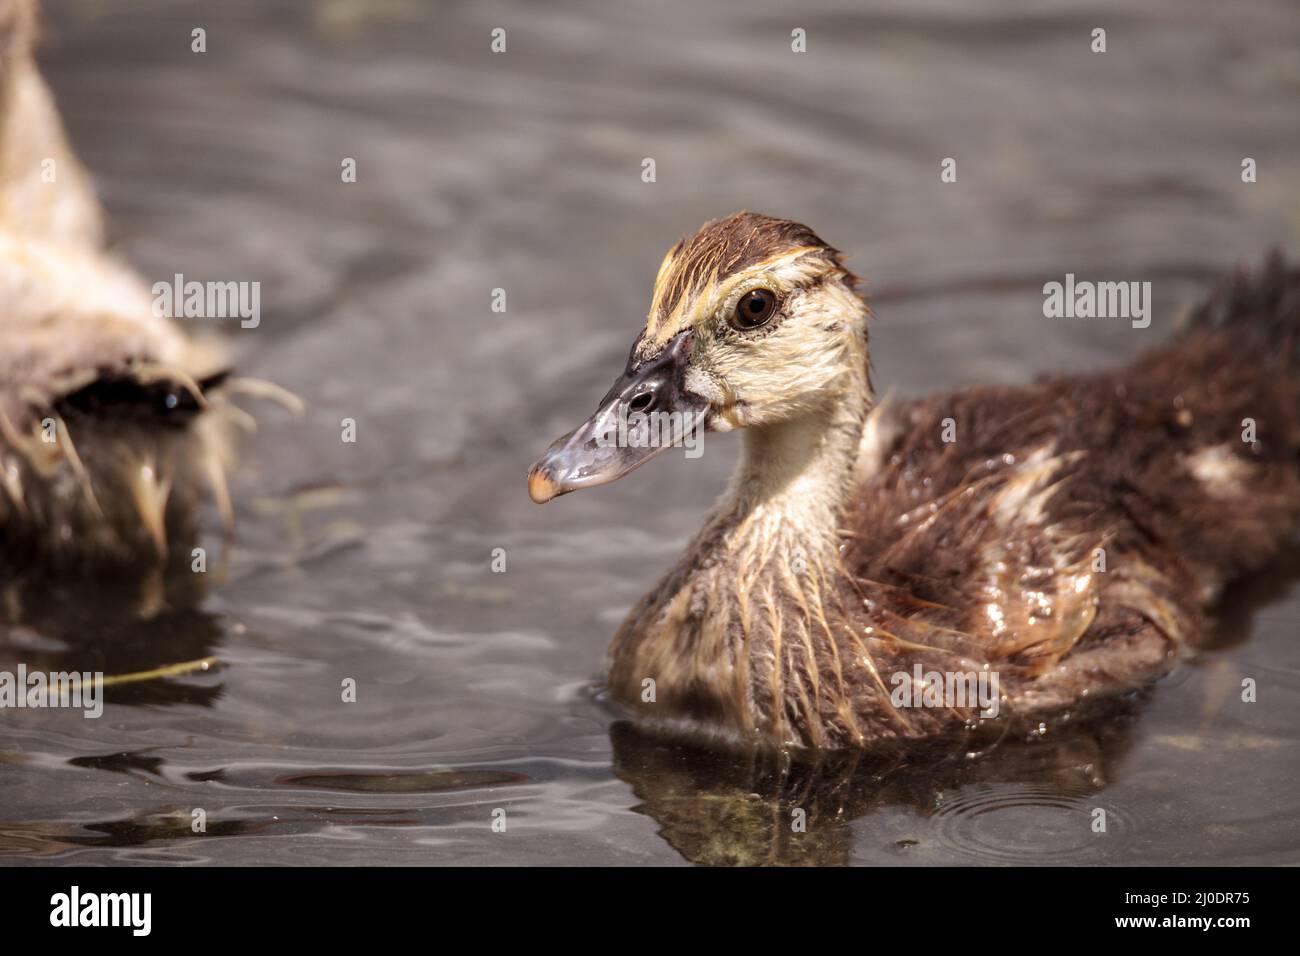 Adolescent juvenile muscovoy duckling Cairina moschata before feathers are fully formed Stock Photo